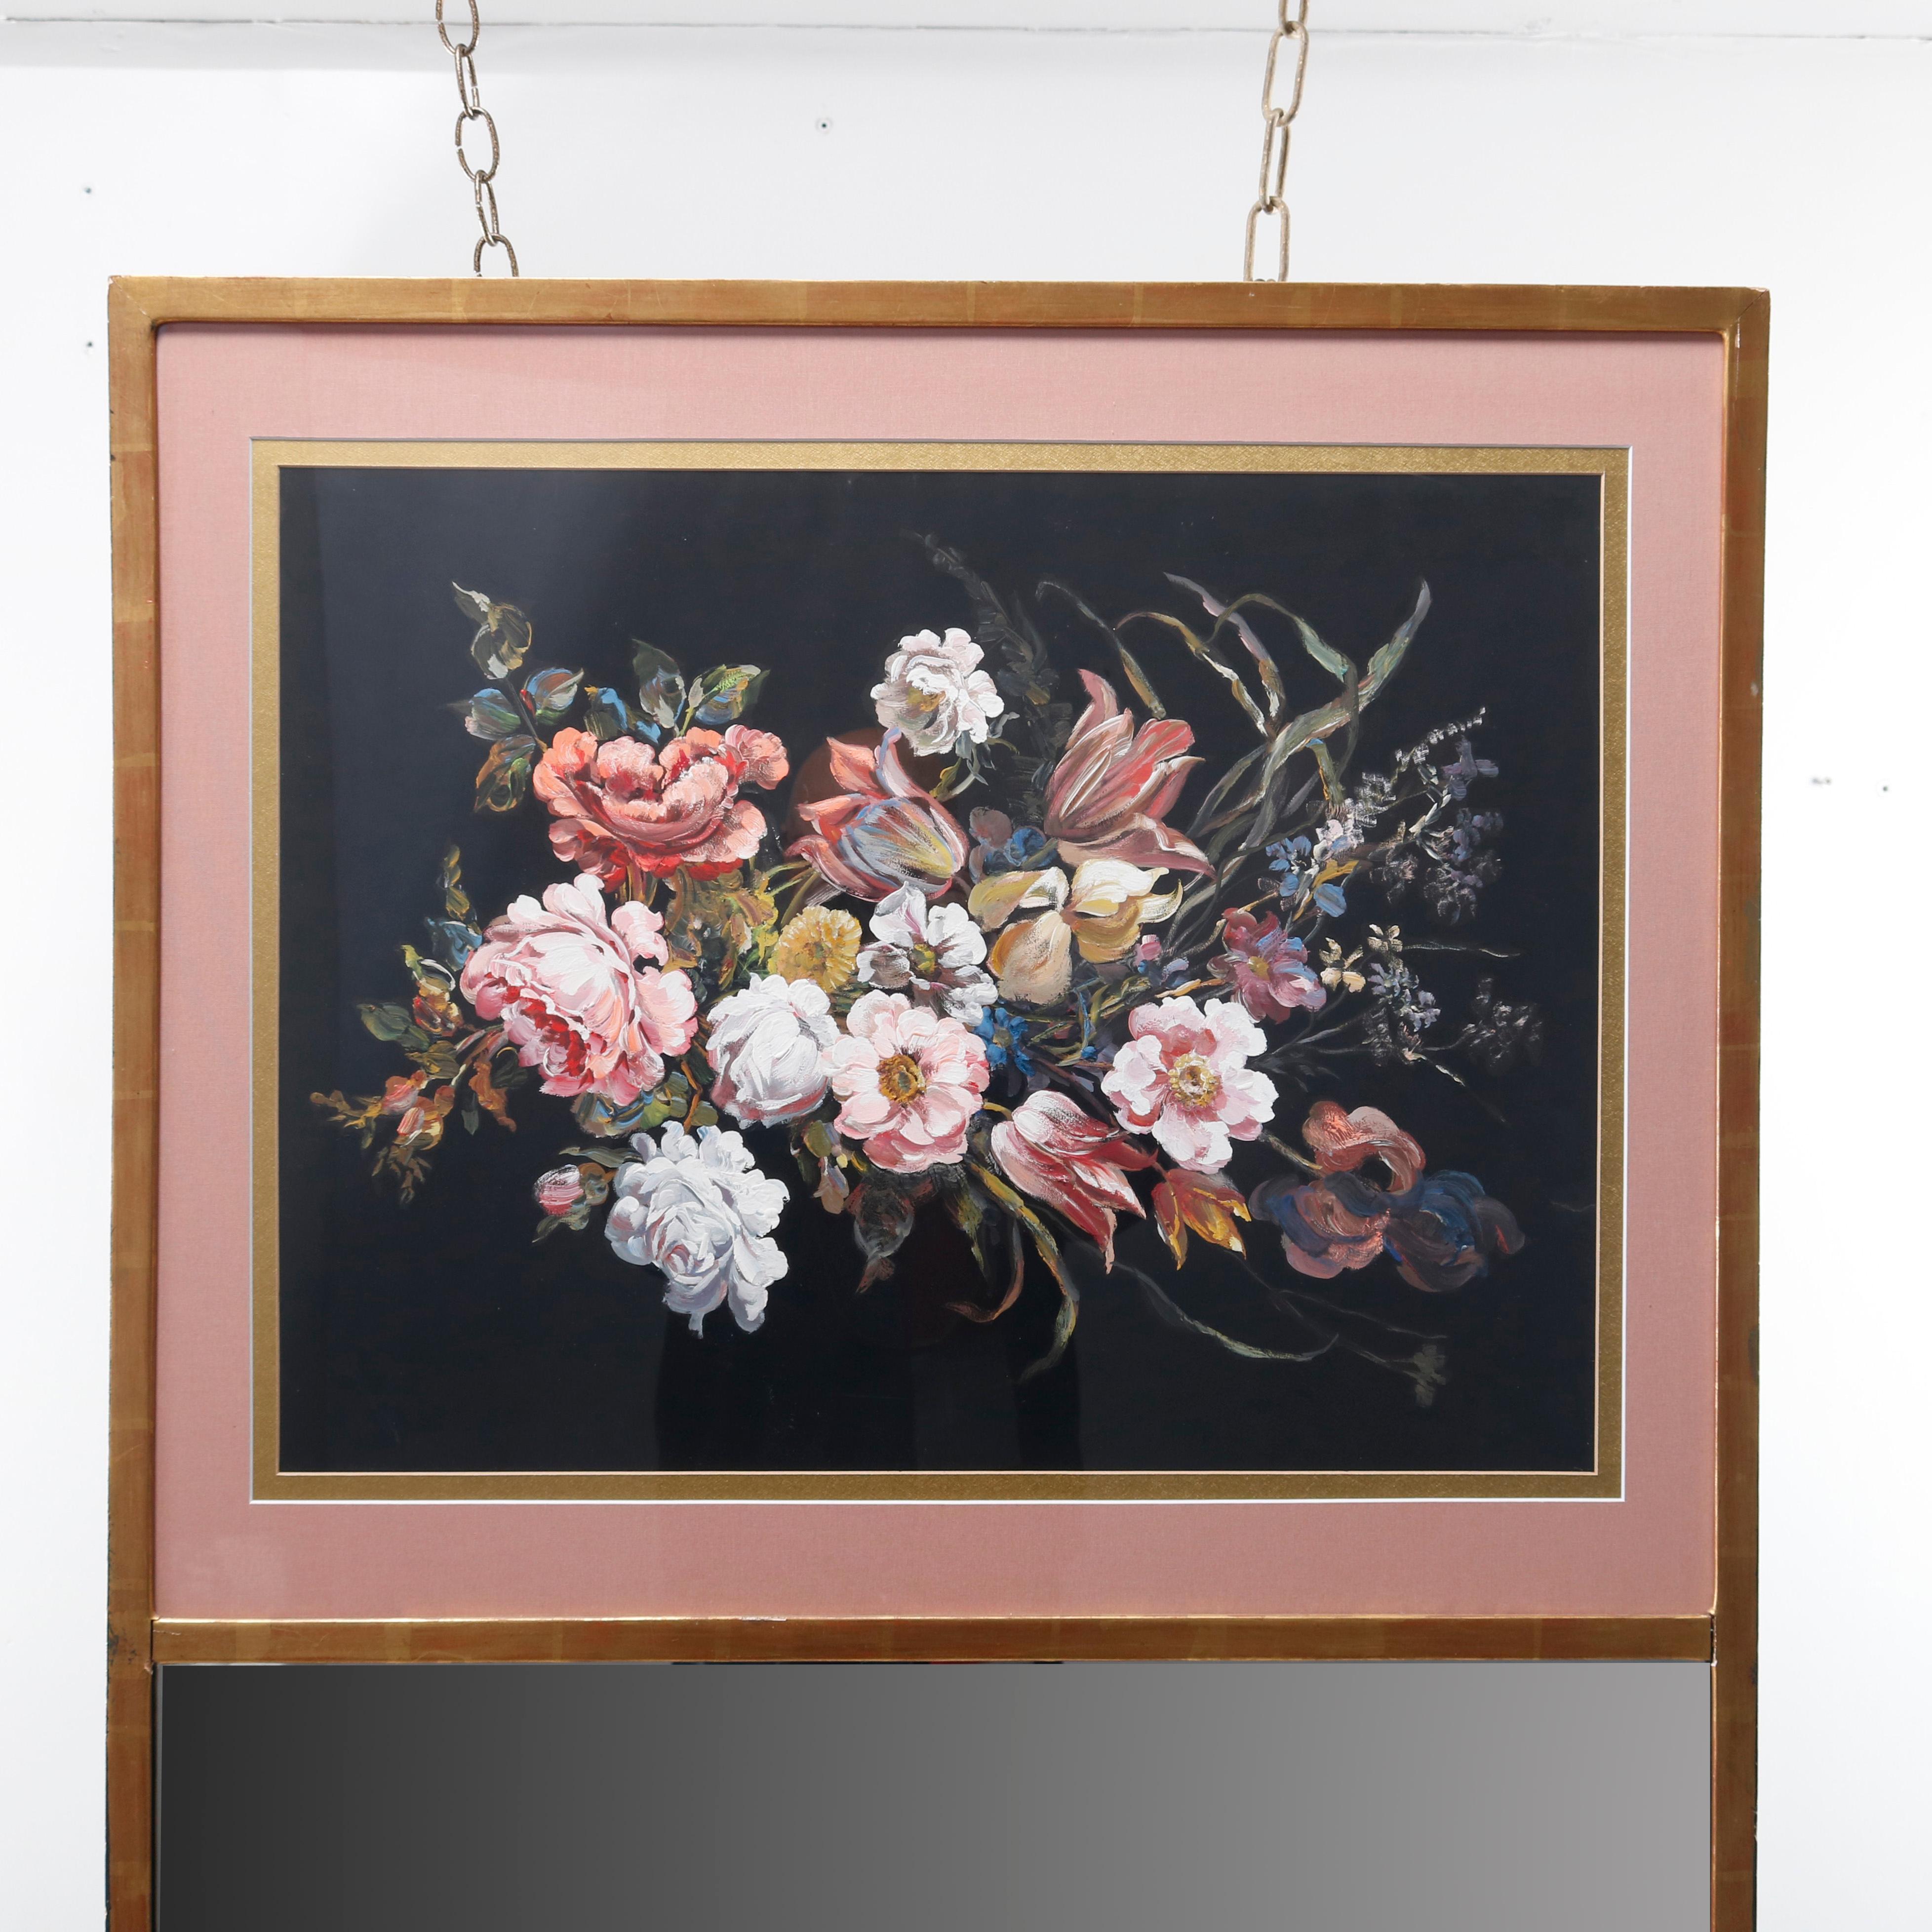 A vintage oversized French style Trumeau mirror offers upper floral still life print over lower mirror, seated in modest giltwood frame, 20th century


Measures: 58.5